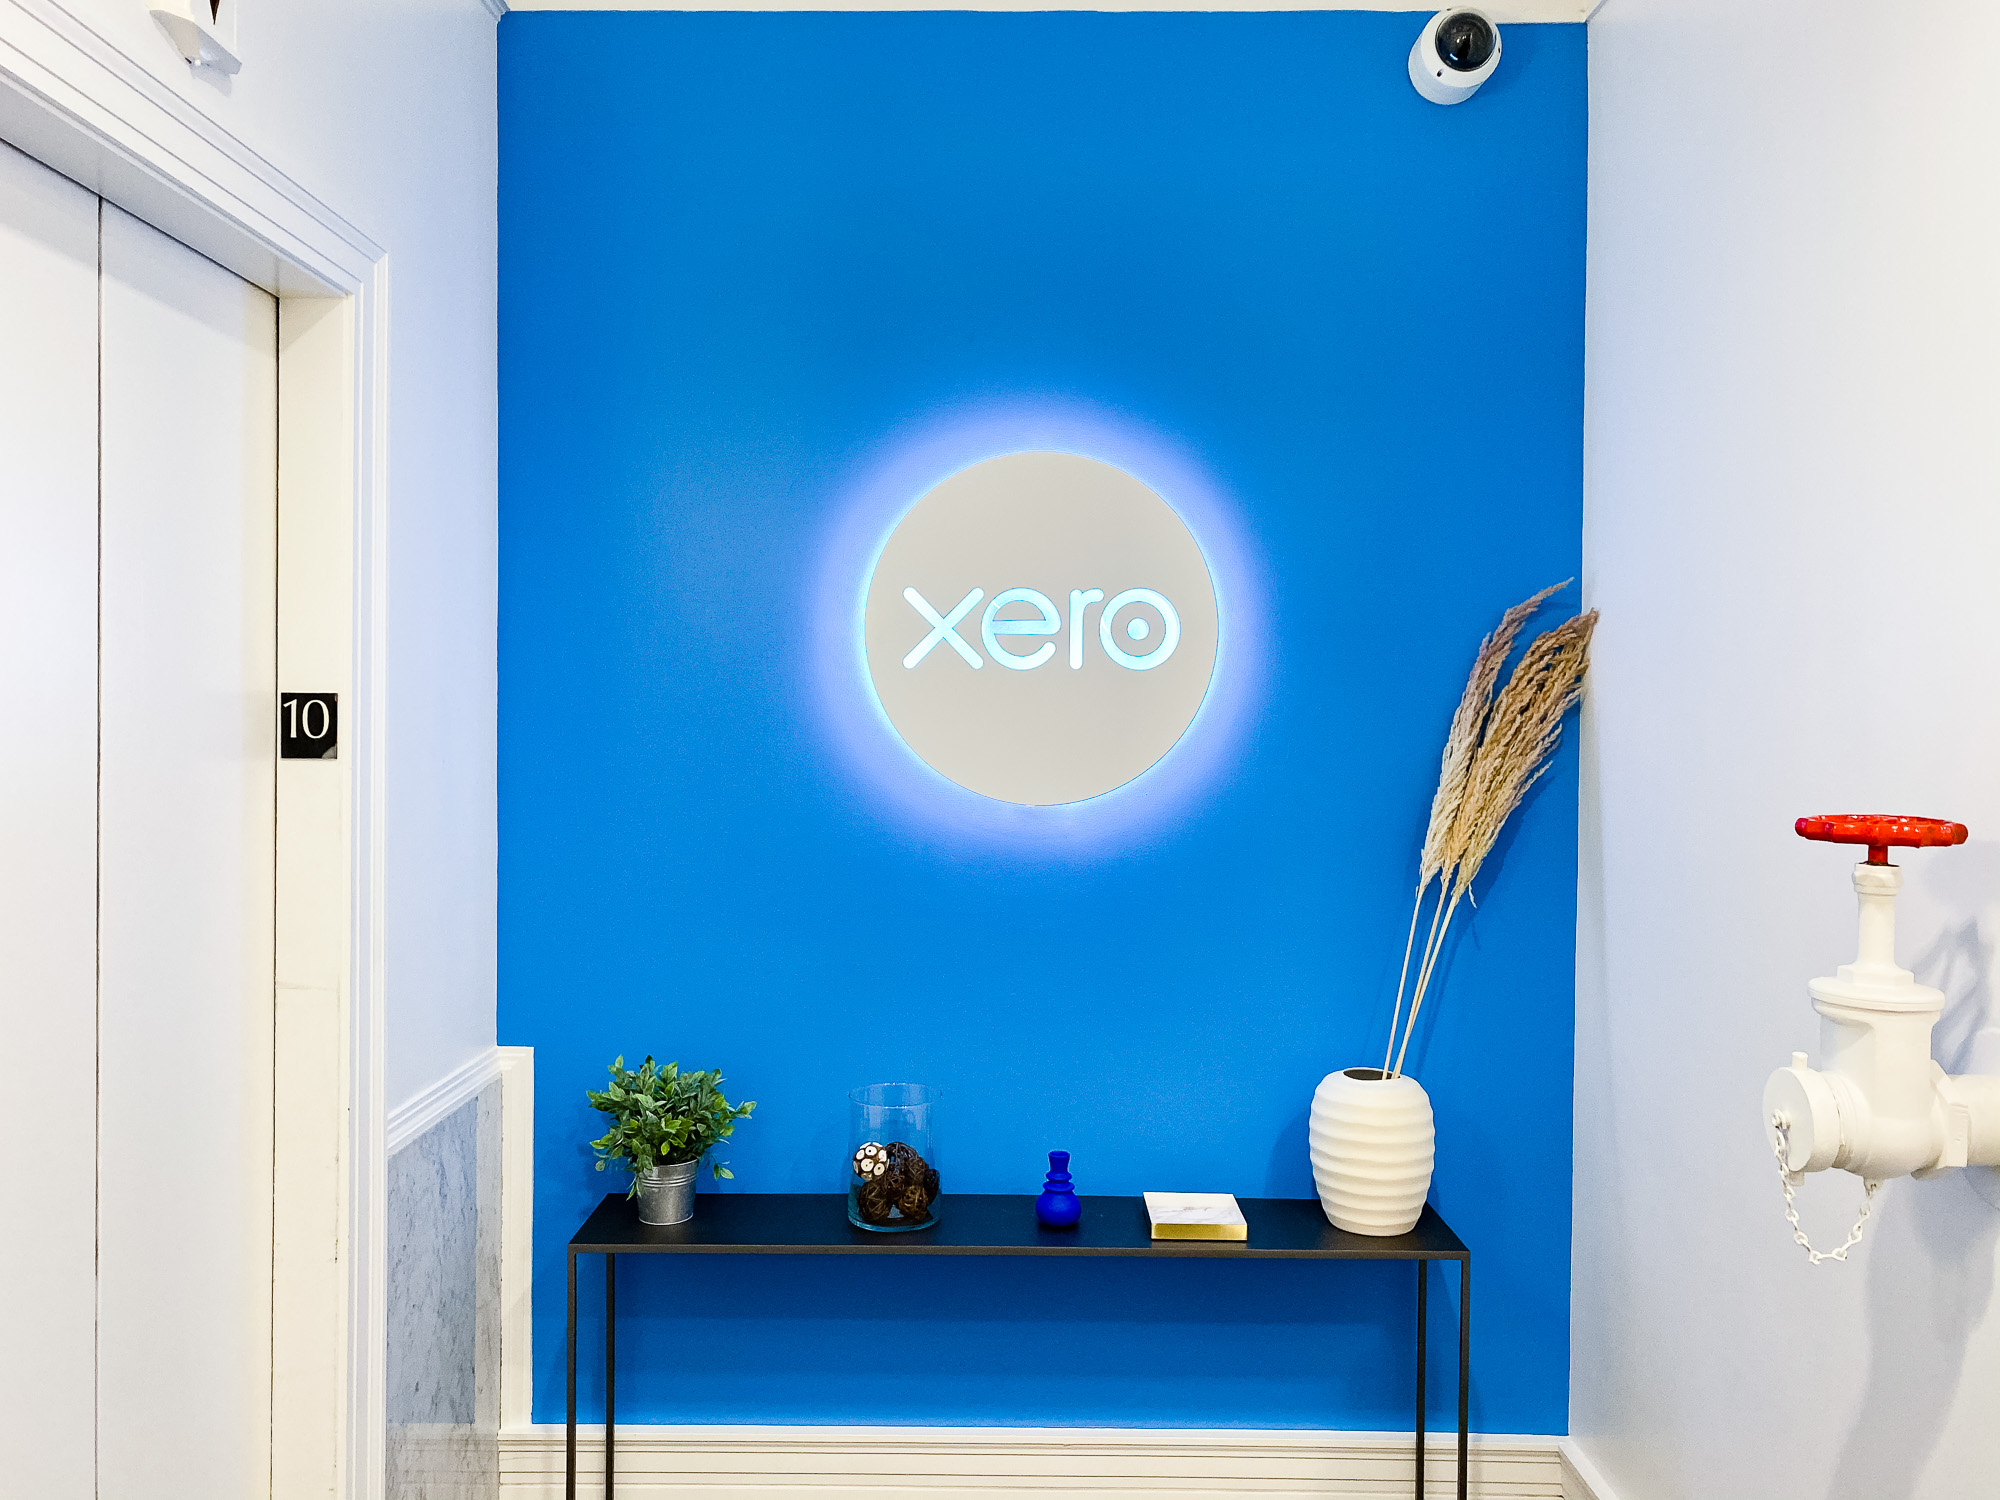 Illuminated, back-lit white sign on blue lobby wall for Xero, a cloud-based accounting software platform for small and medium-sized businesses.